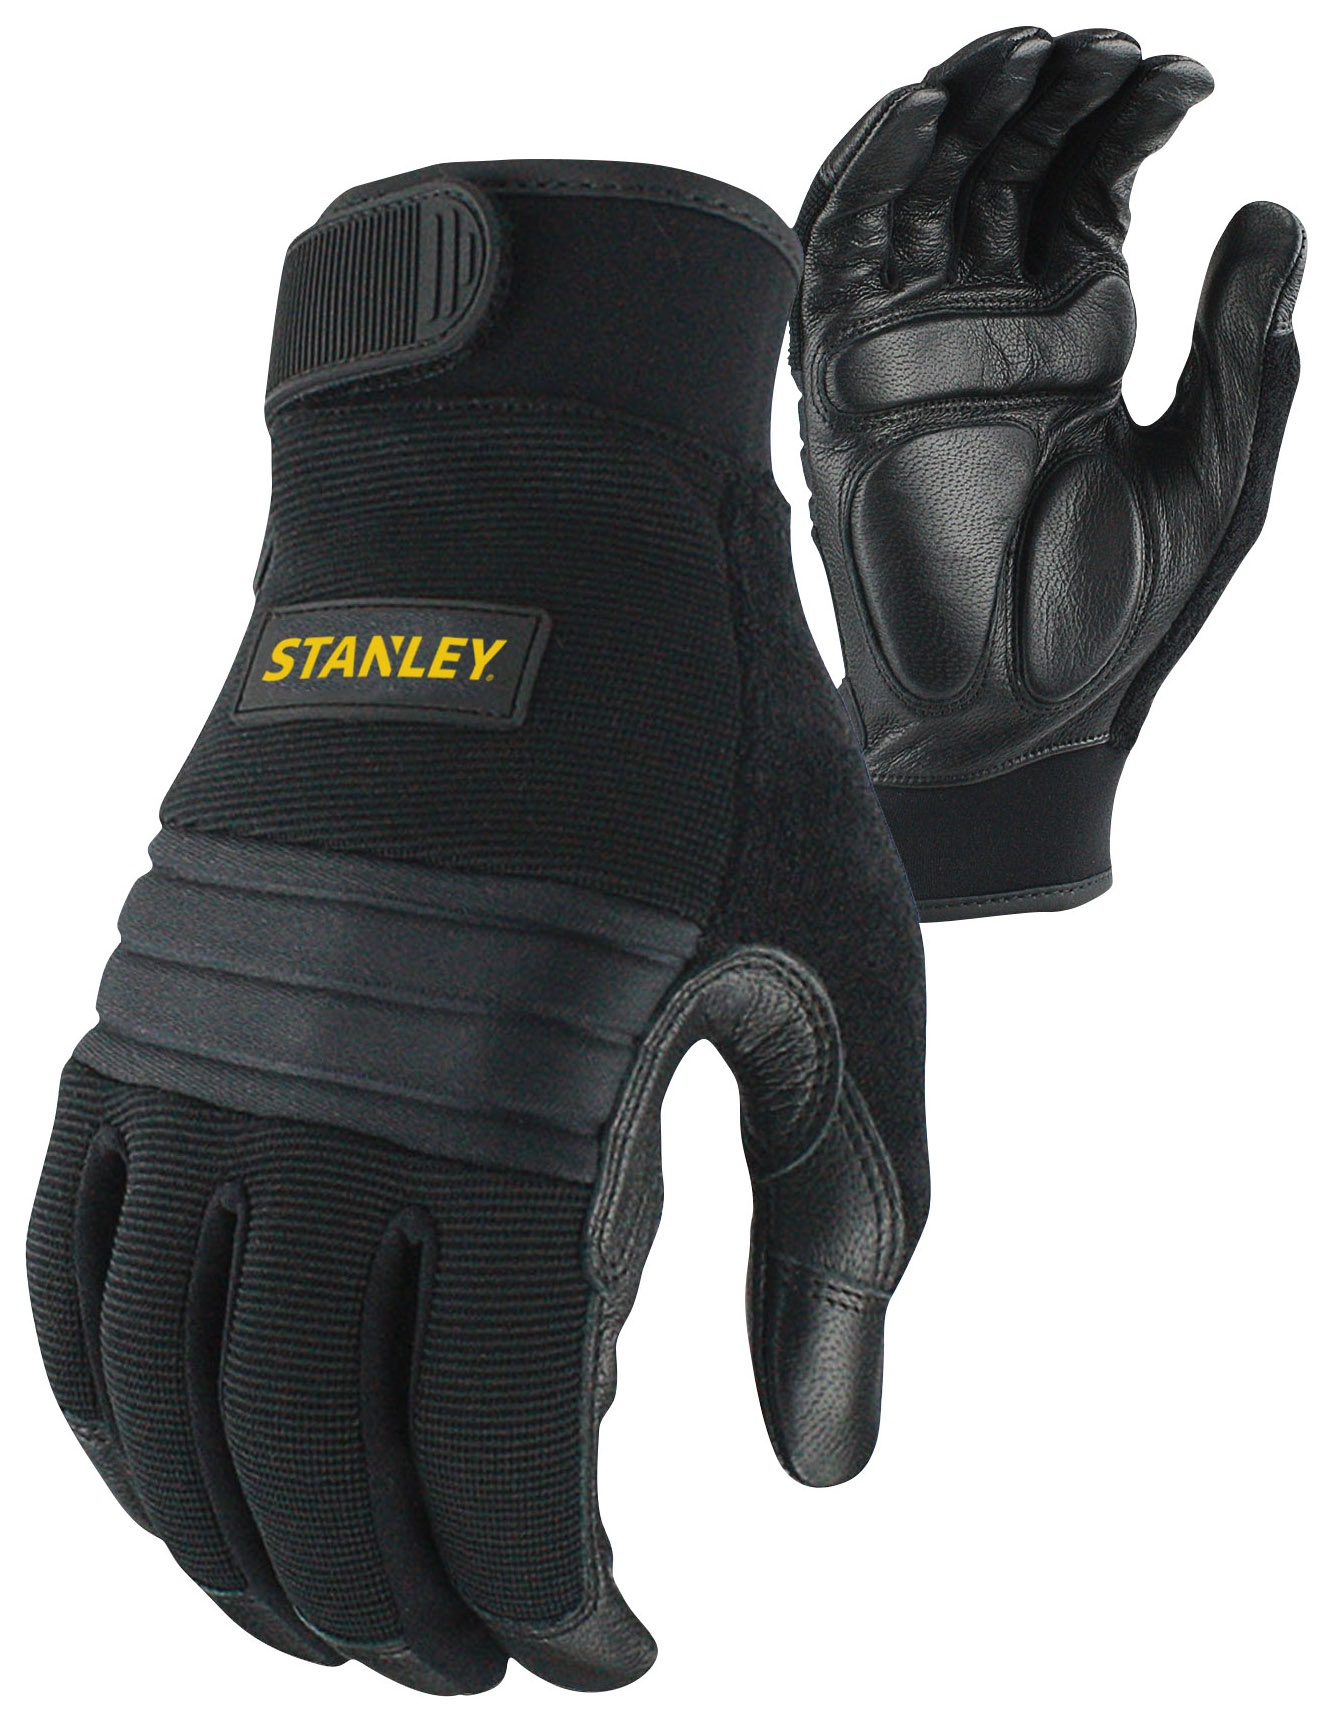 Image of Stanley SY800L Vibration Absorption Performance Black Glove - Size L